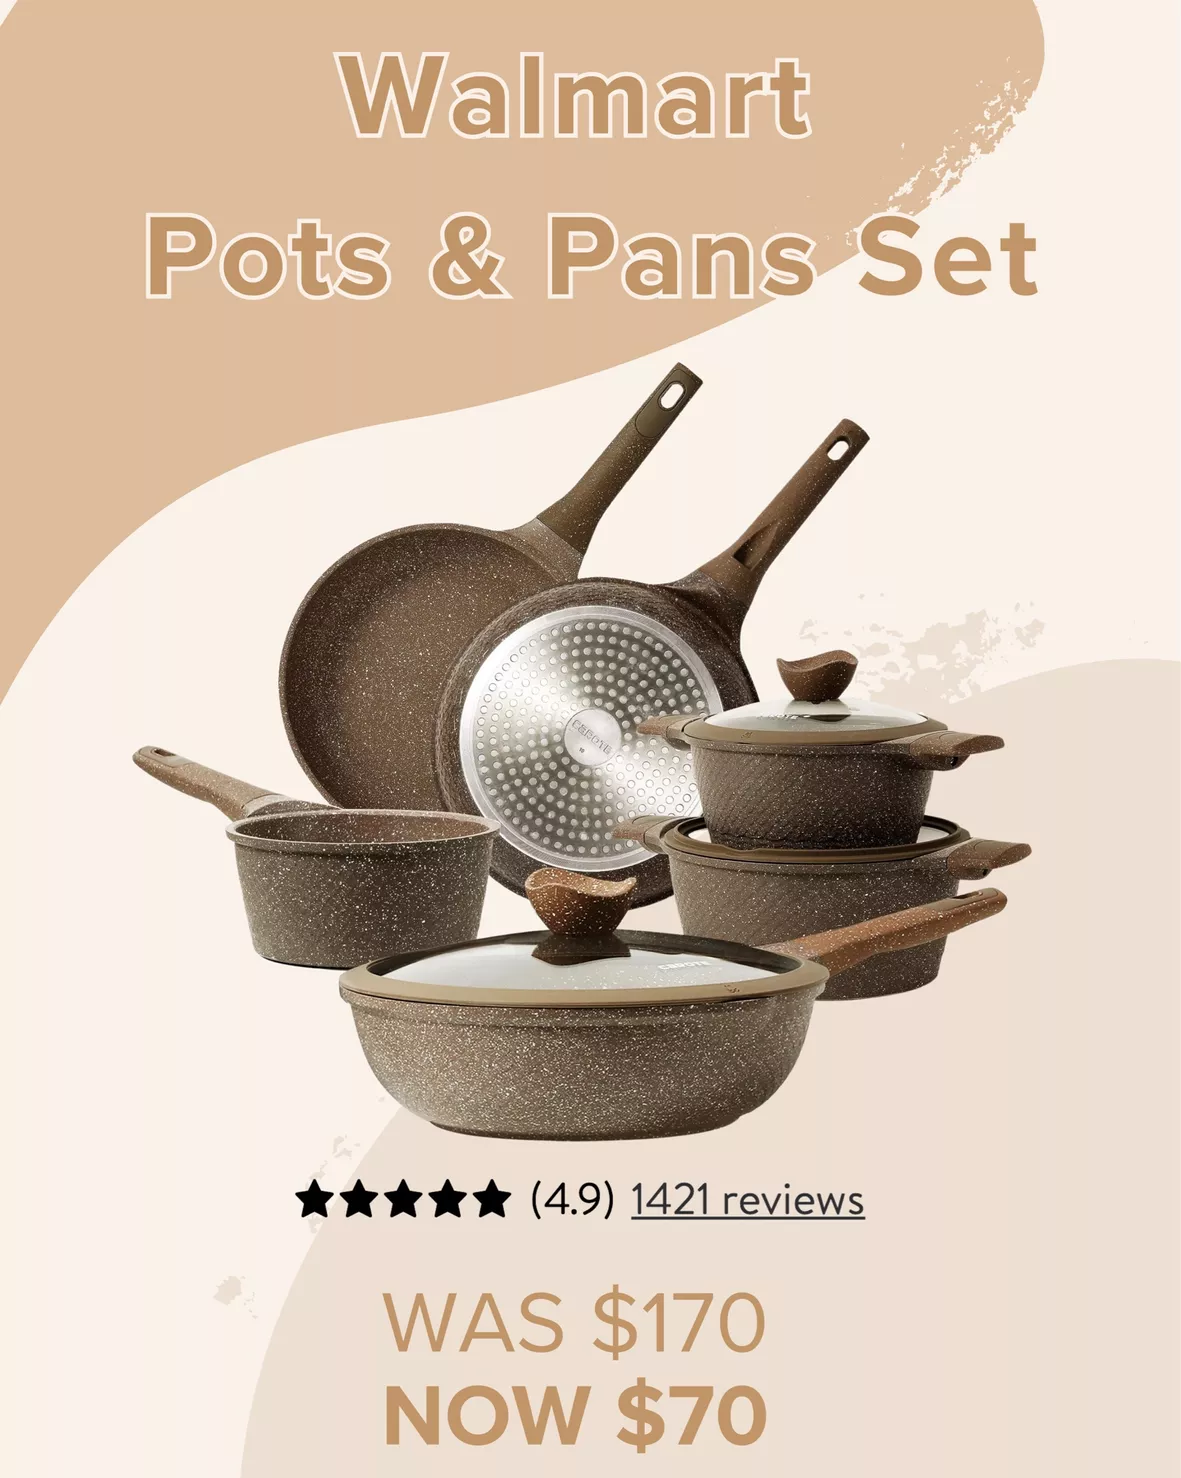 CAROTE 10 Pcs Non -Stick Cookware Set- FULL REVIEW 